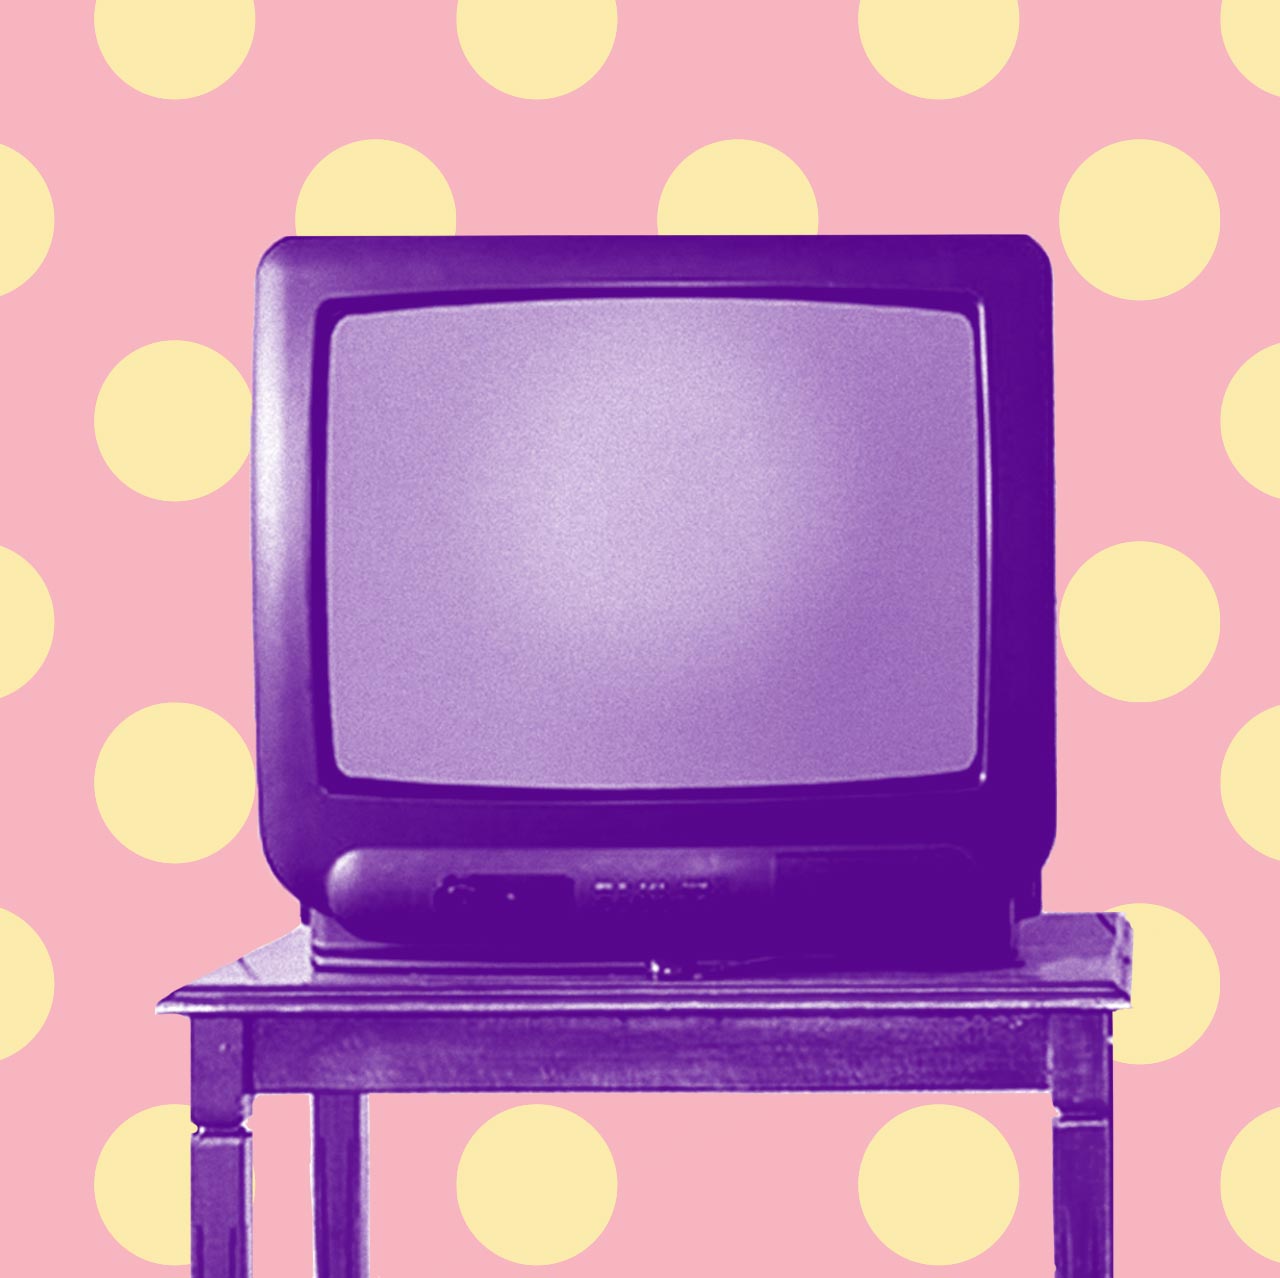 Photo of television on top of a stool.